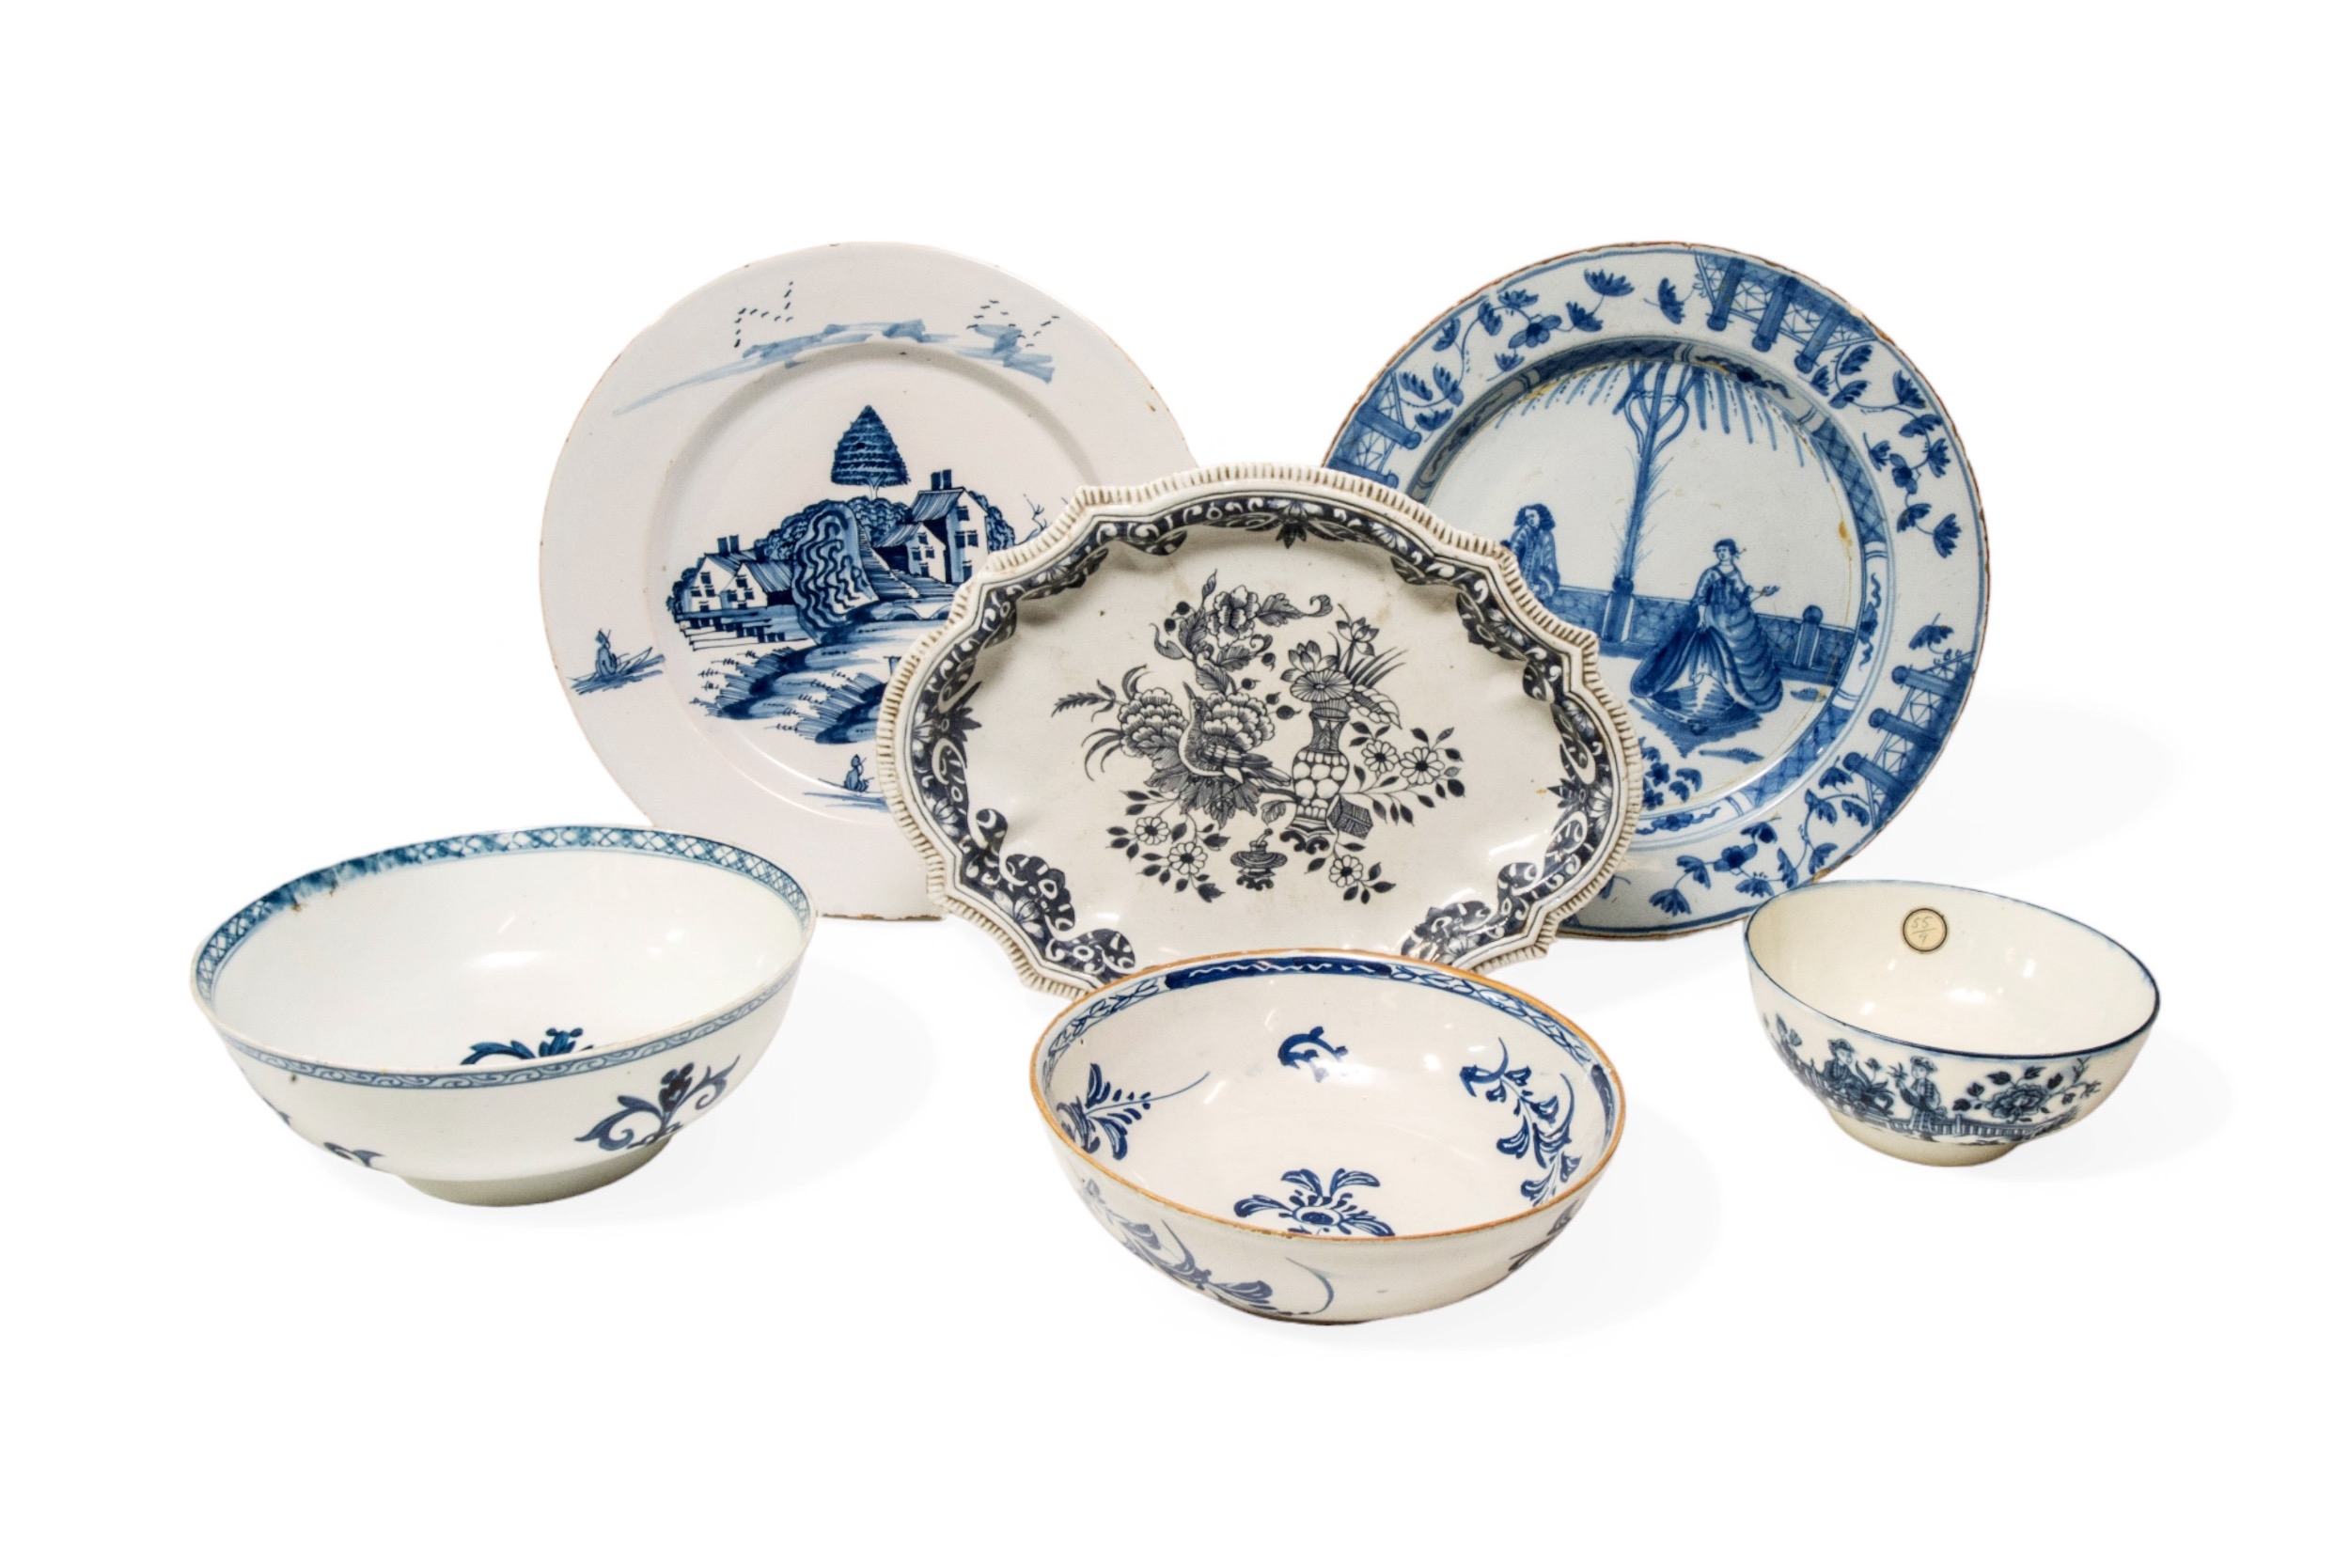 TWO DELFT CHARGERS Mid 18th century, once with two figures in European dress, together with a